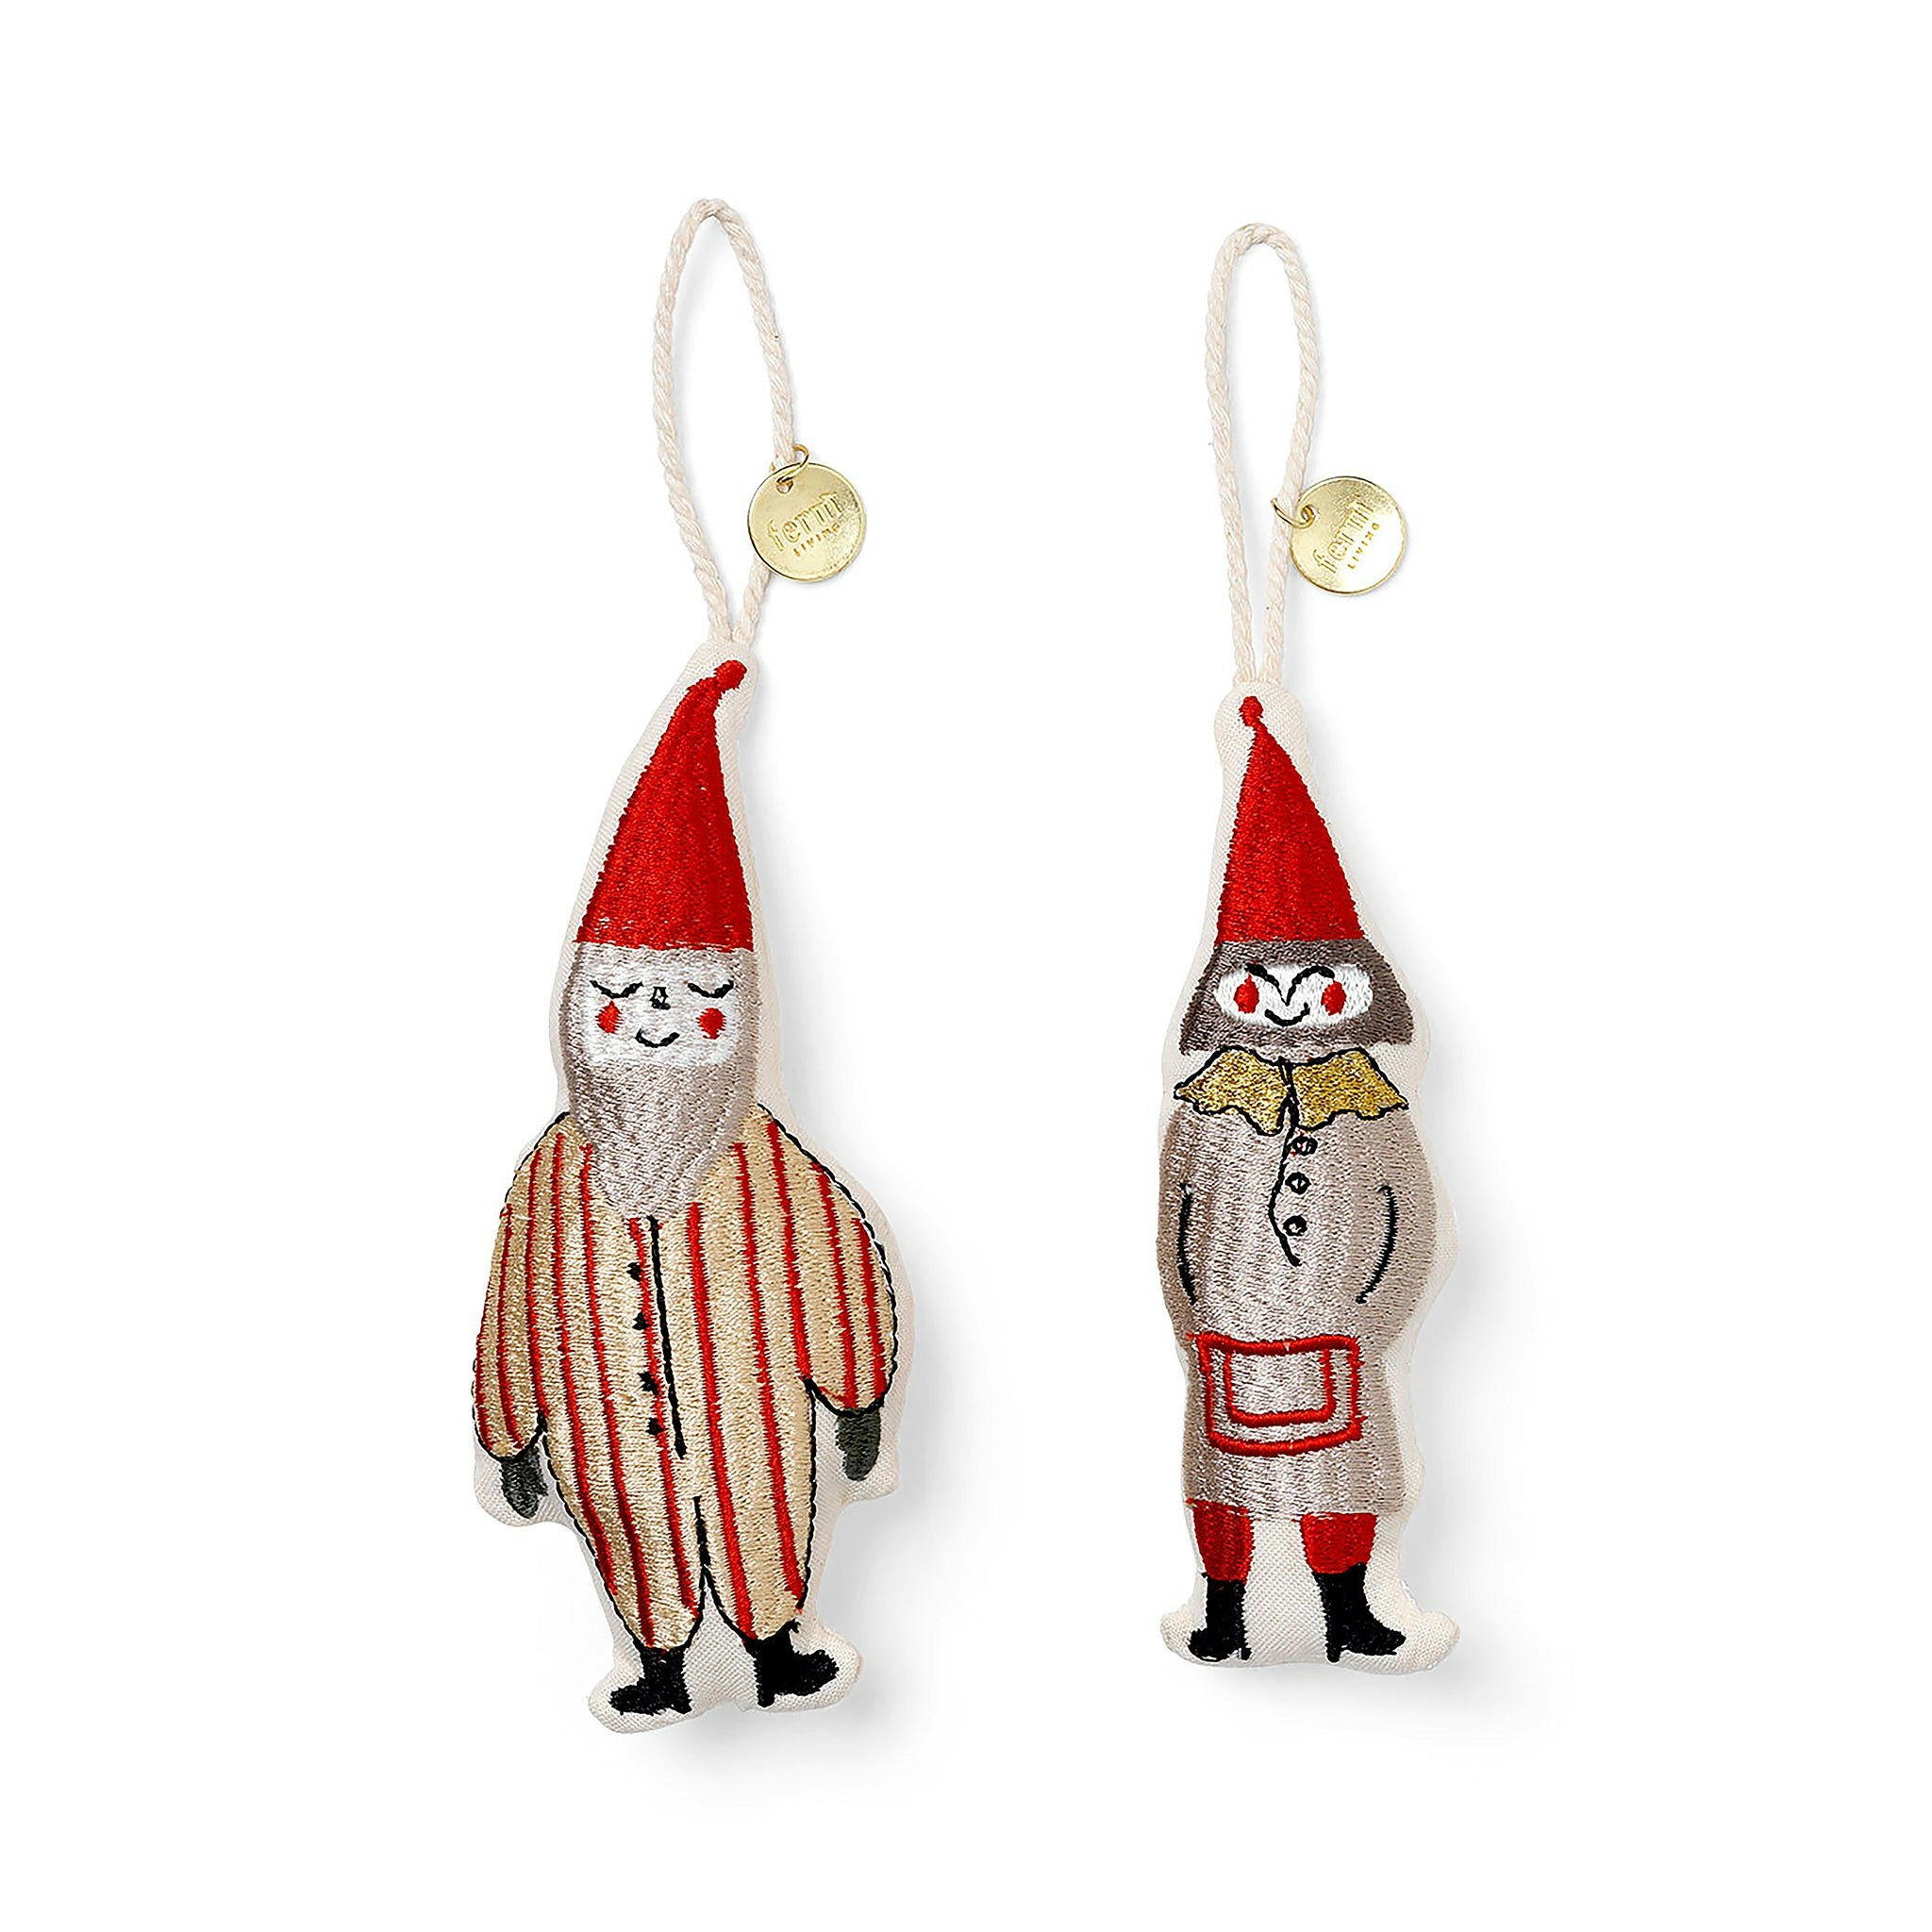 Elf Pair Ornaments - Striped by Ferm Living